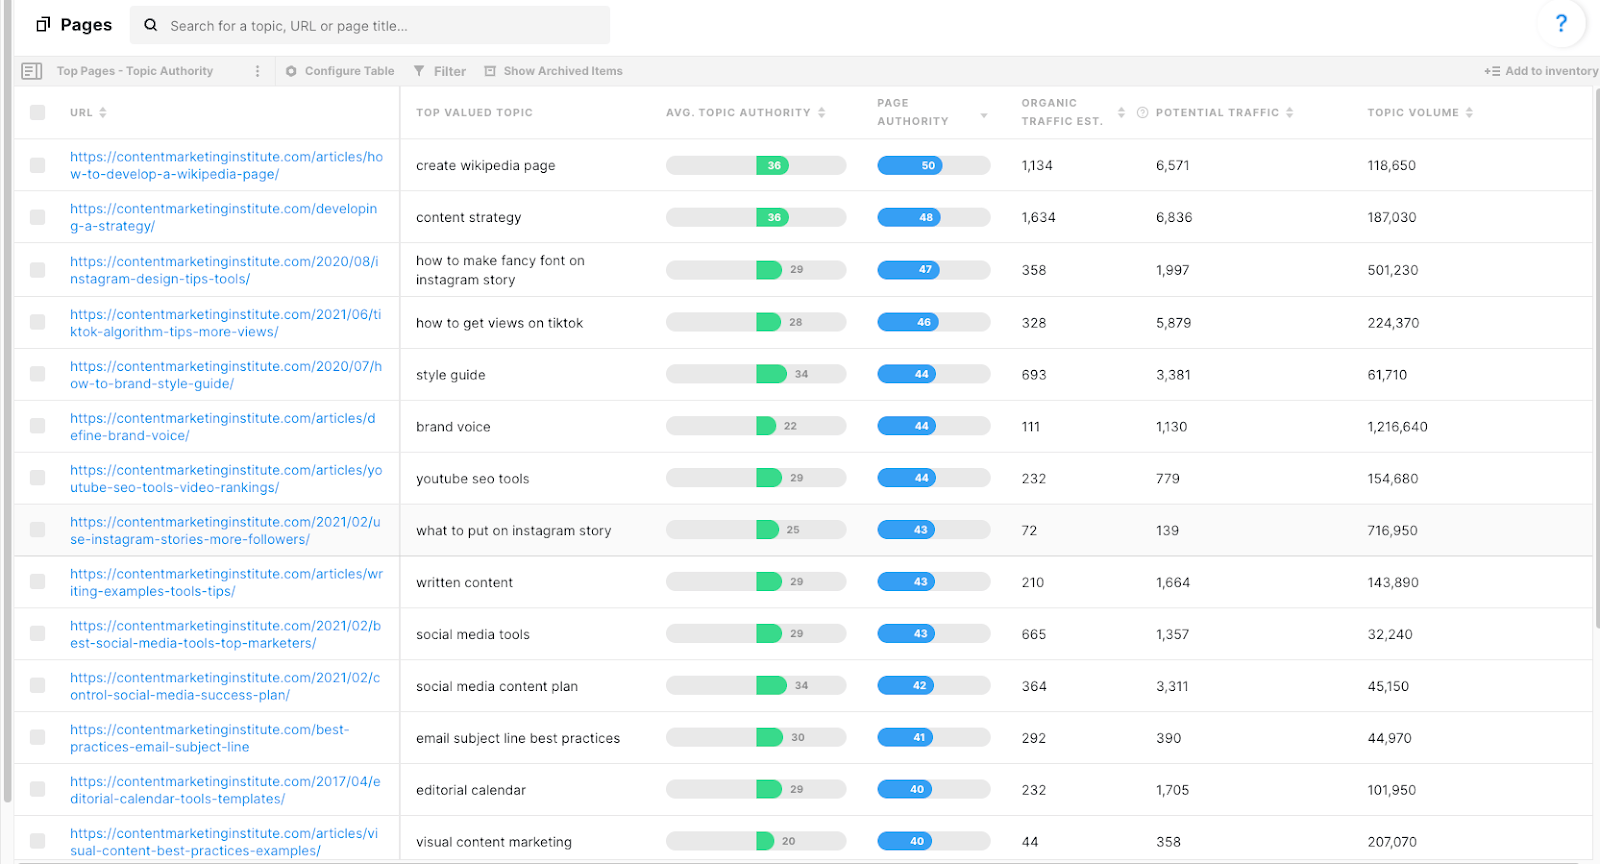 MarketMuse Page Inventory showing list of URLS with the following metrics: top valued topic, avg. topic authority, page authority, organic traffic estimate, potential traffic, and topic volume.